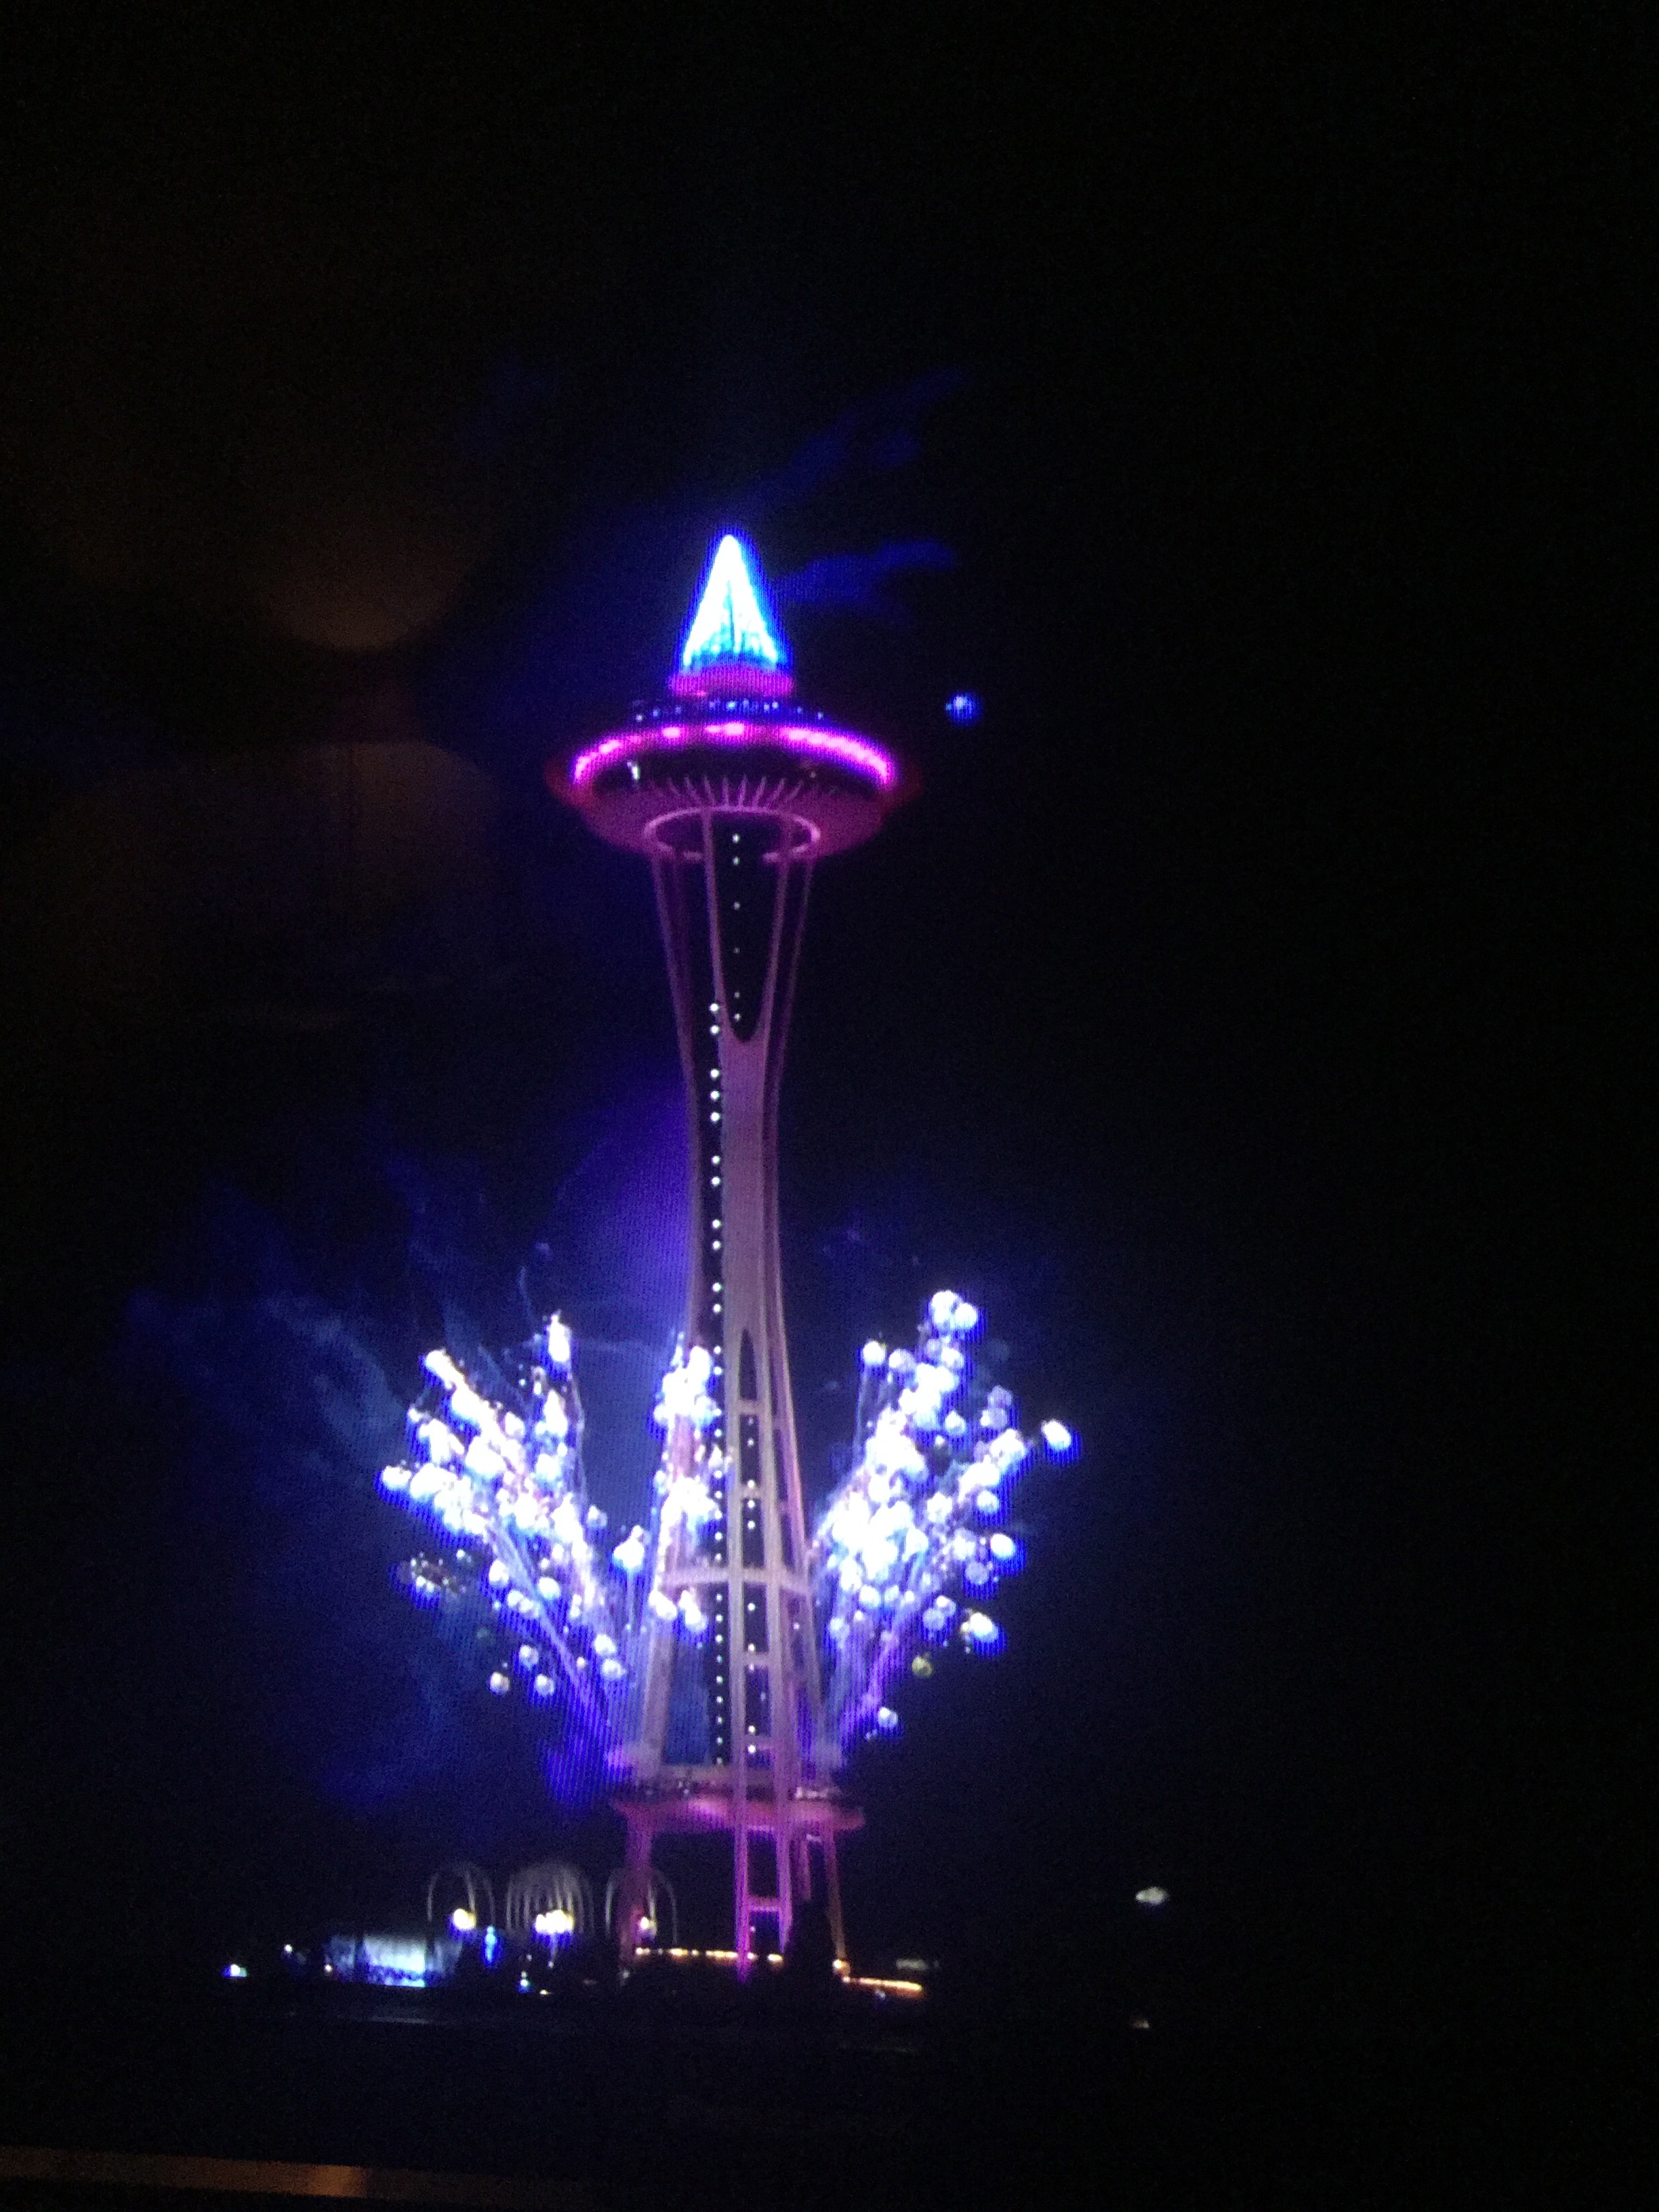 we also waited to watch the Space needle's fireworks celebration (in bed)